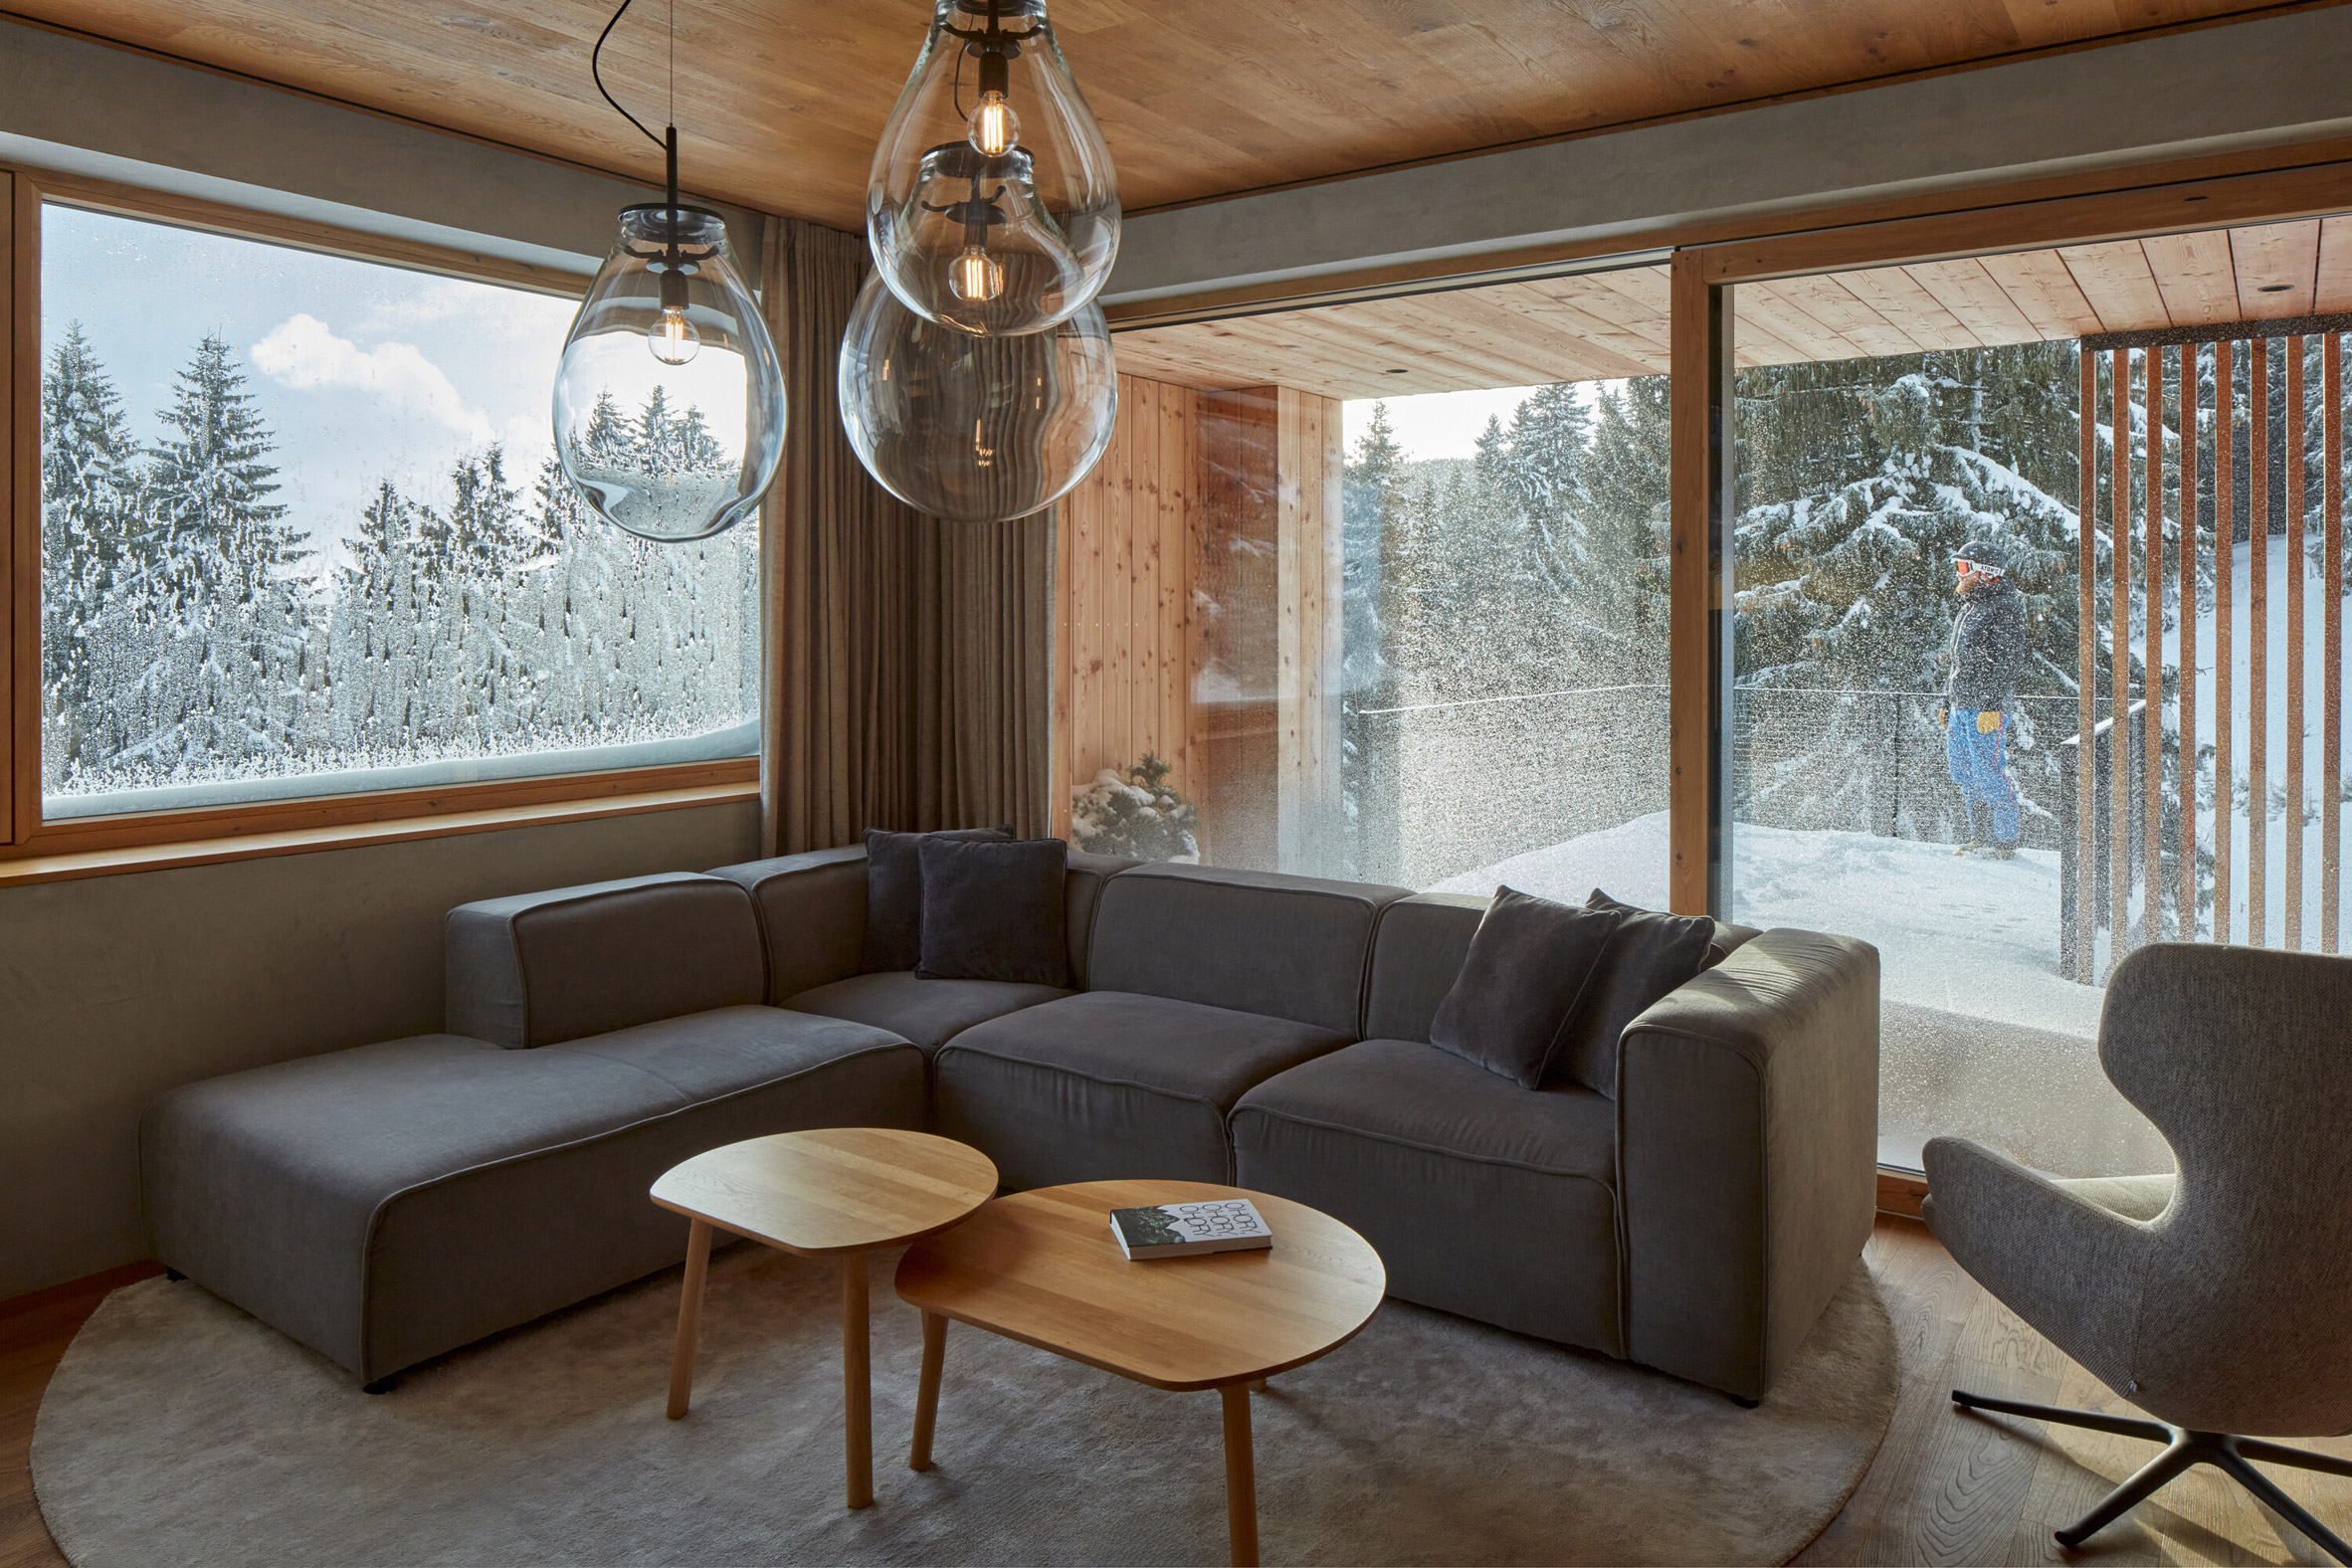 Living room with views over snowy landscape in Czech Republic